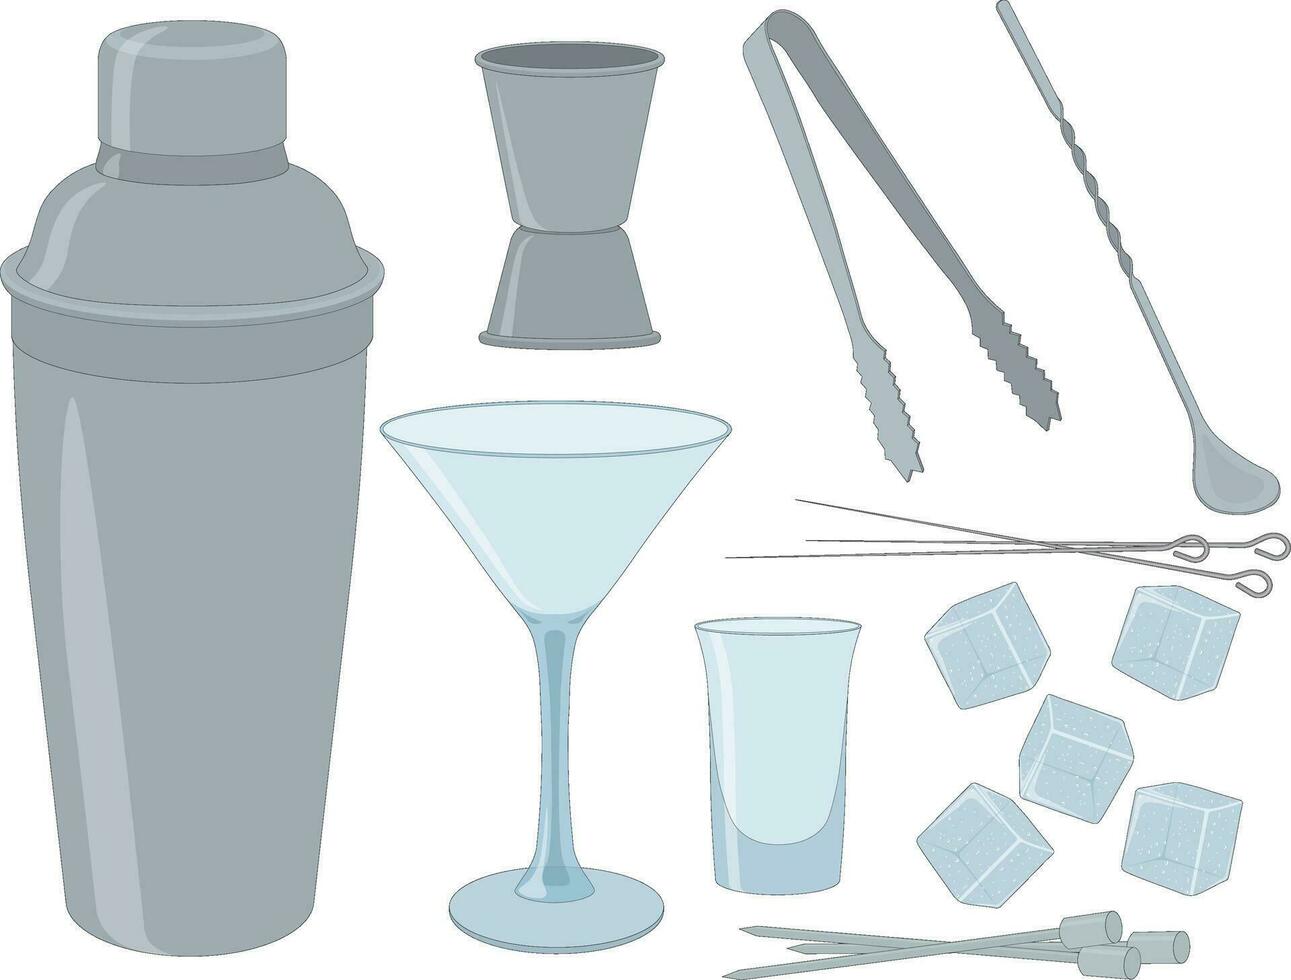 Cocktail making set with shaker, jigger, spoon, cocktail glasses and skewer vector illustration